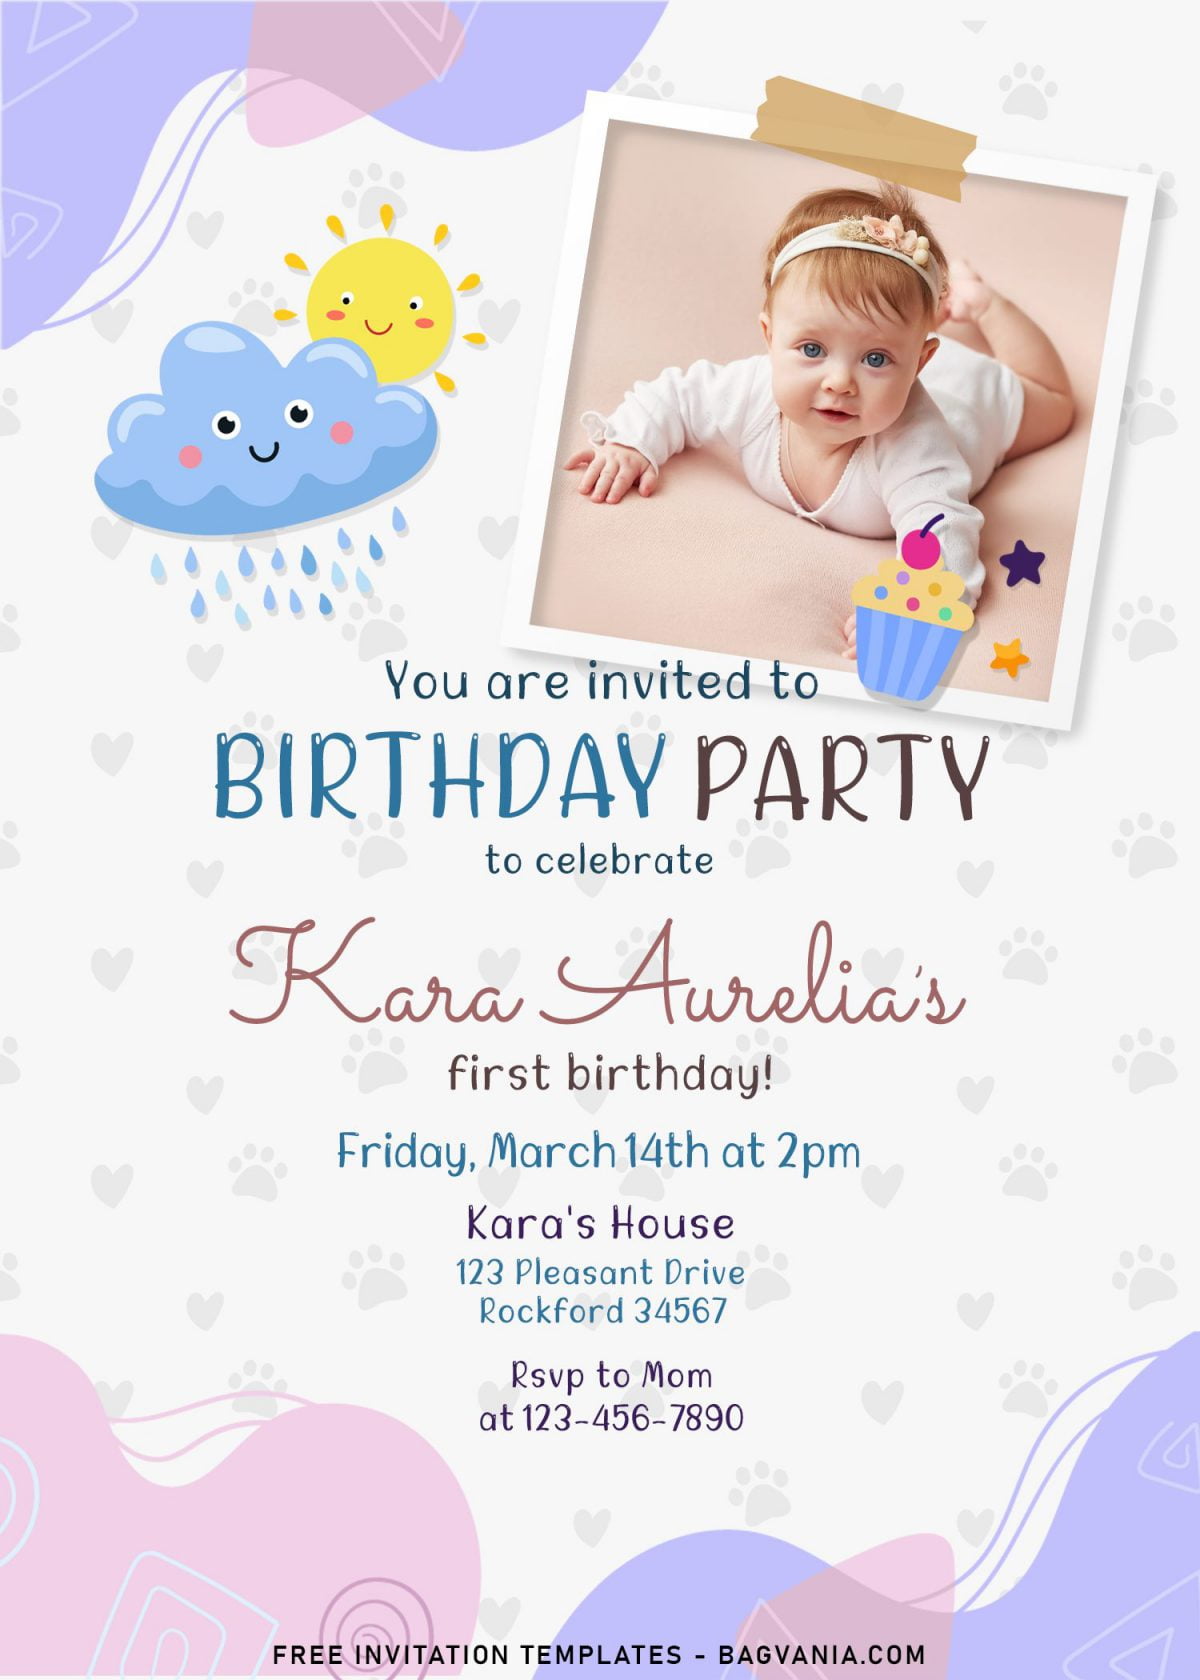 8+ Colorful Hand Drawn Birthday Invitation Templates For Your Kid's Birthday